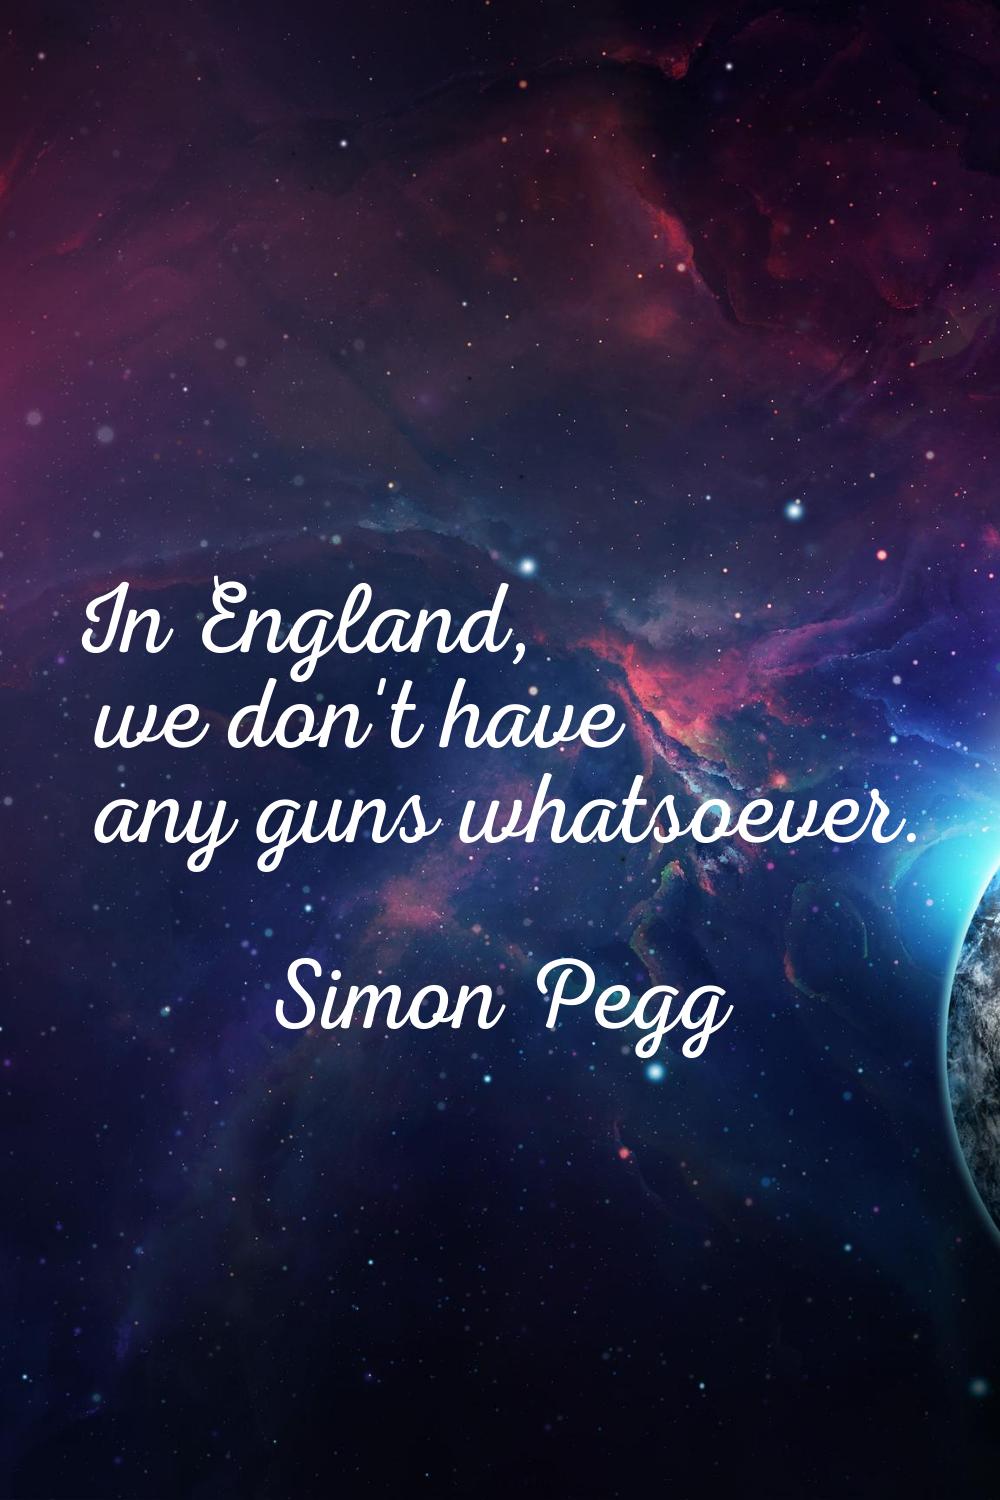 In England, we don't have any guns whatsoever.